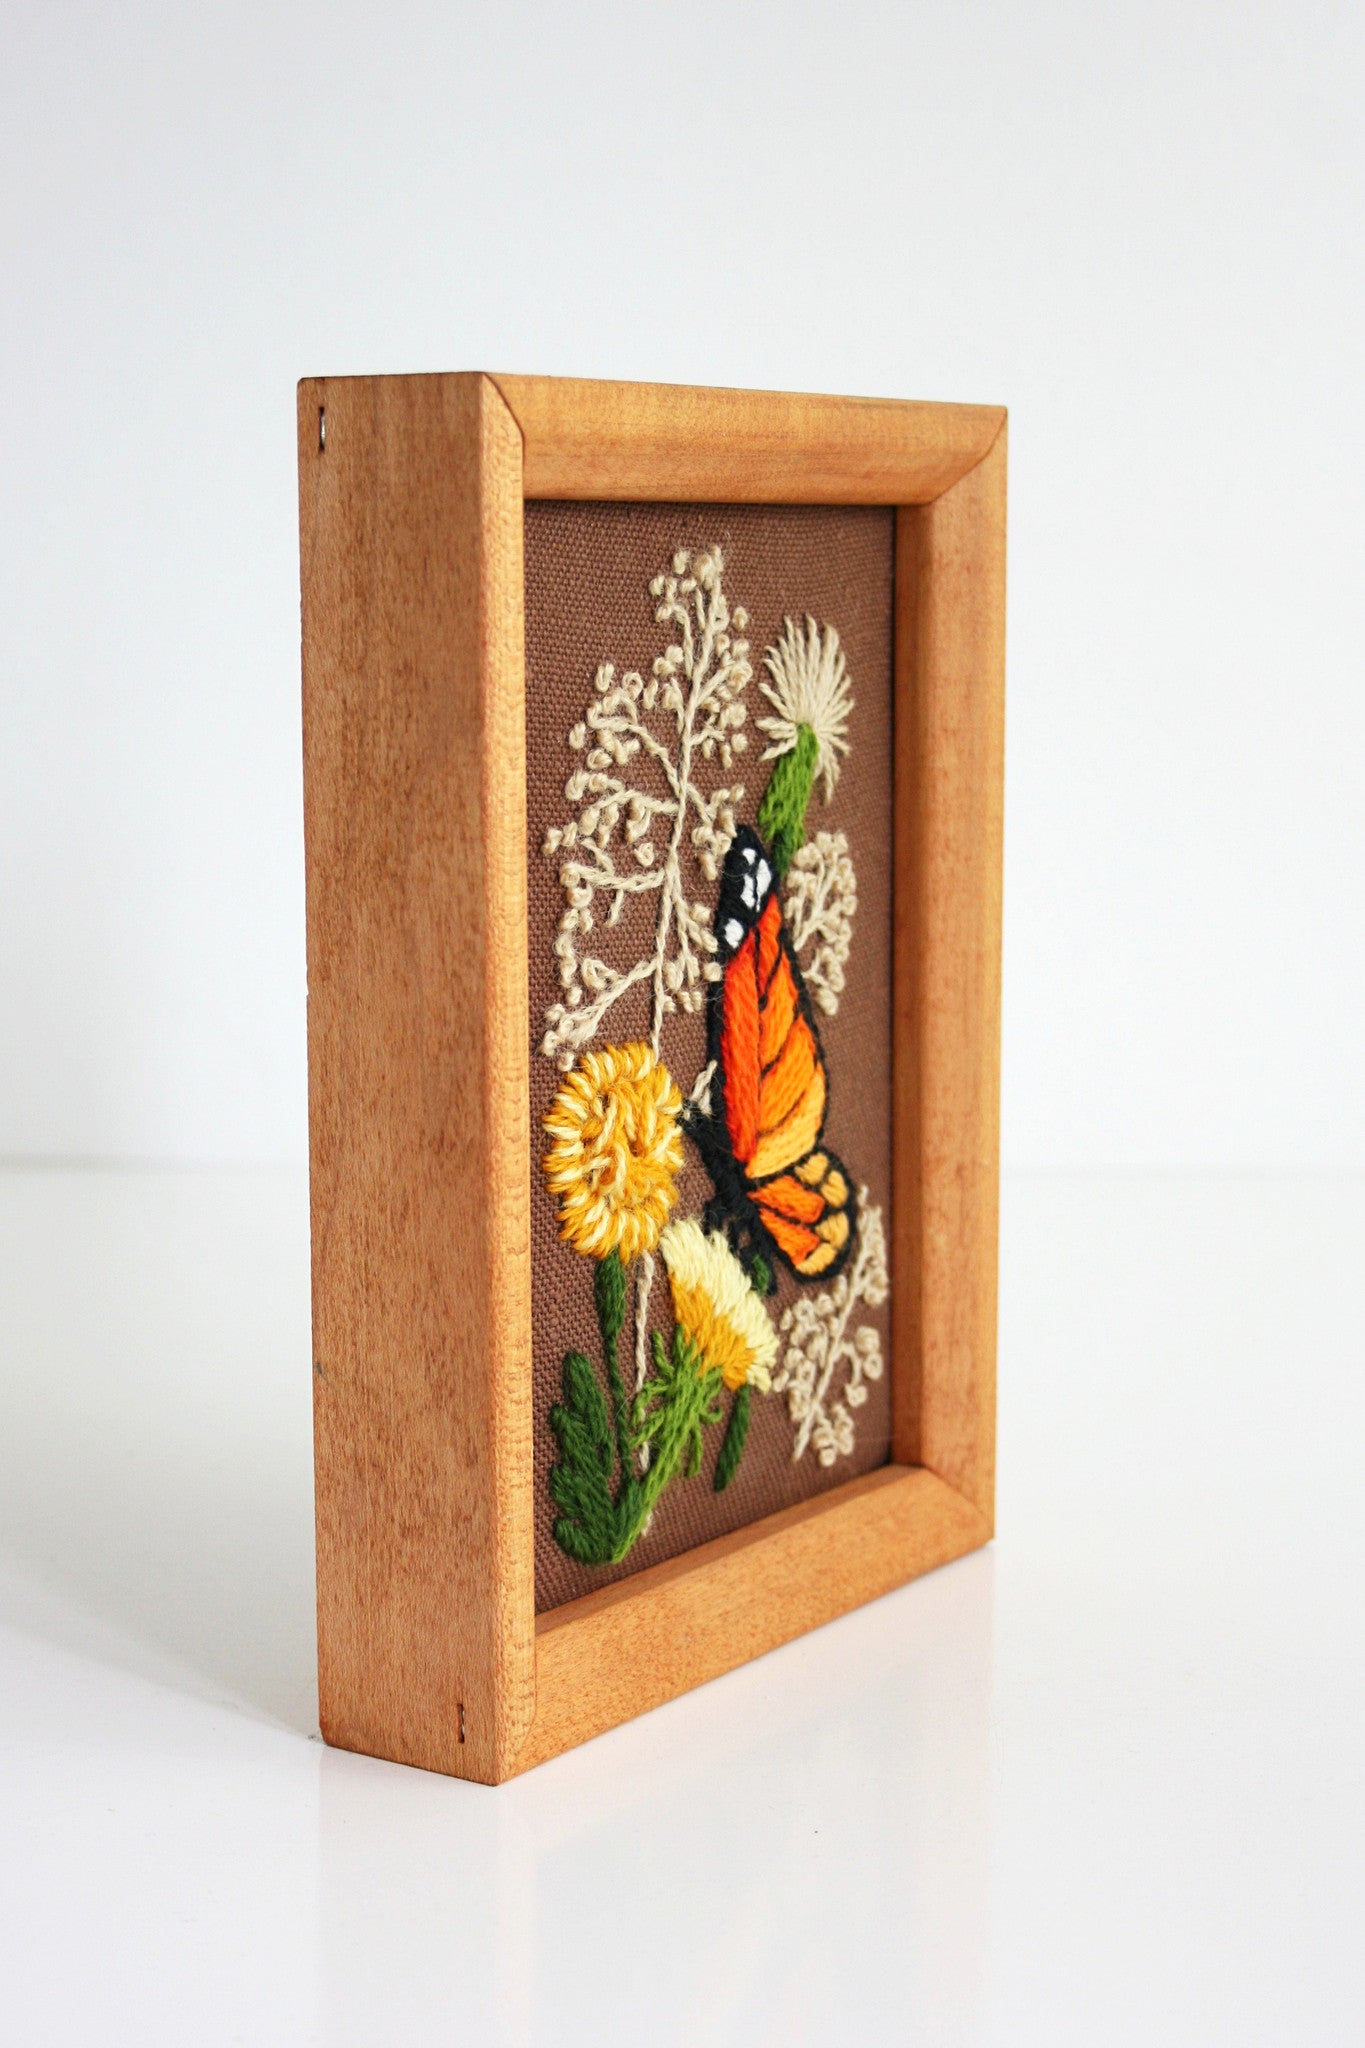 SOLD - Vintage Framed Monarch Butterfly Crewel Embroidery